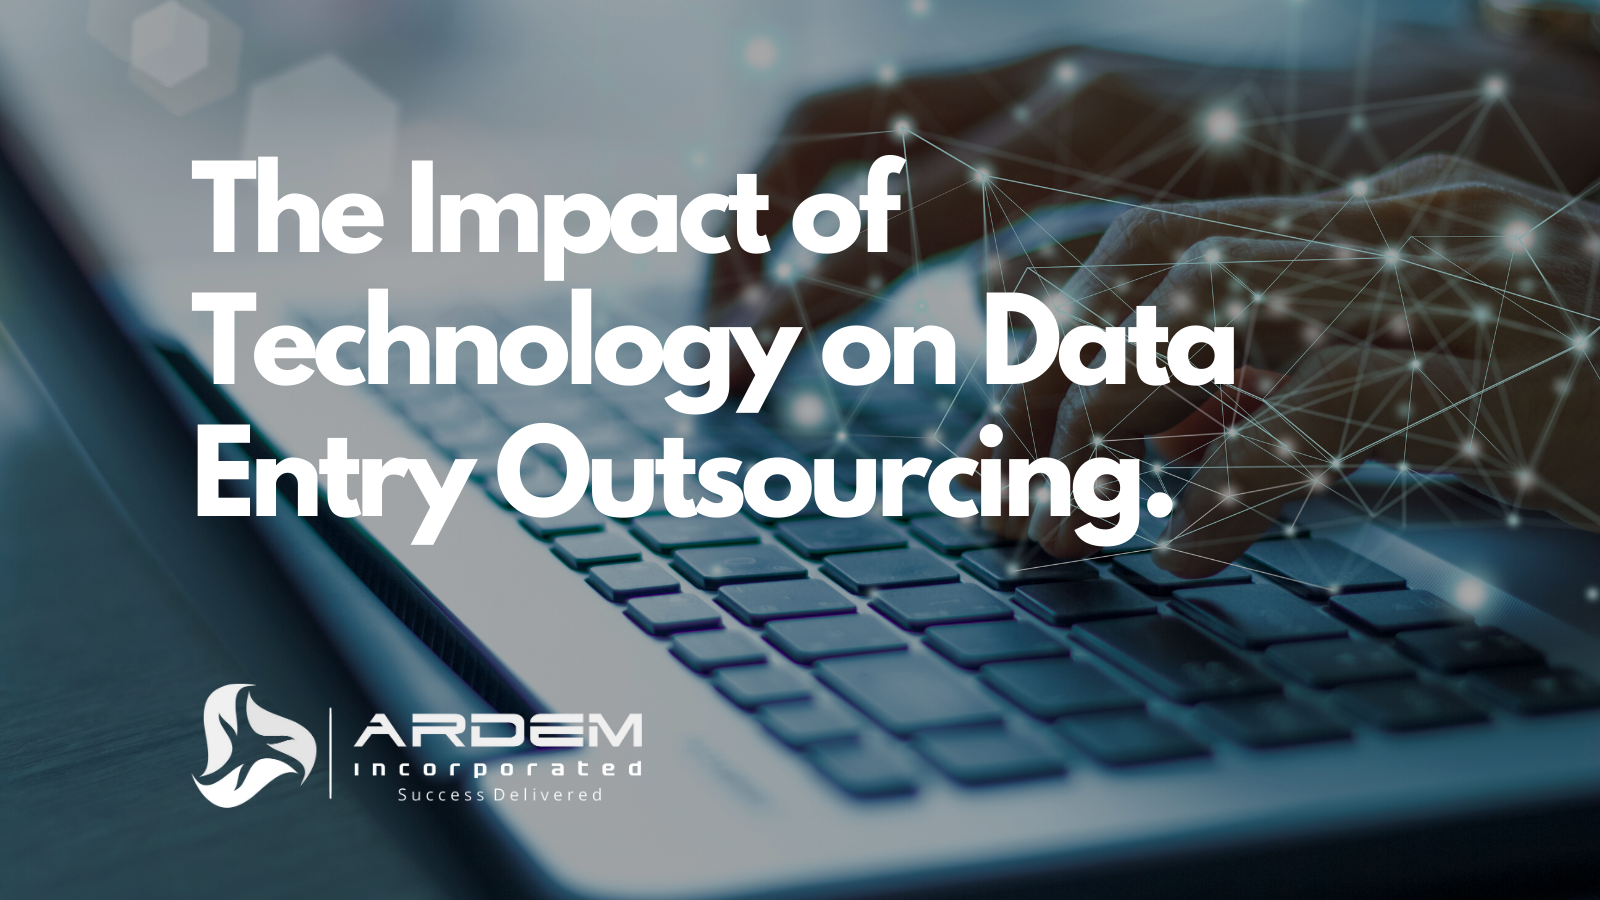 Data Entry Outsourcing Technology Blog